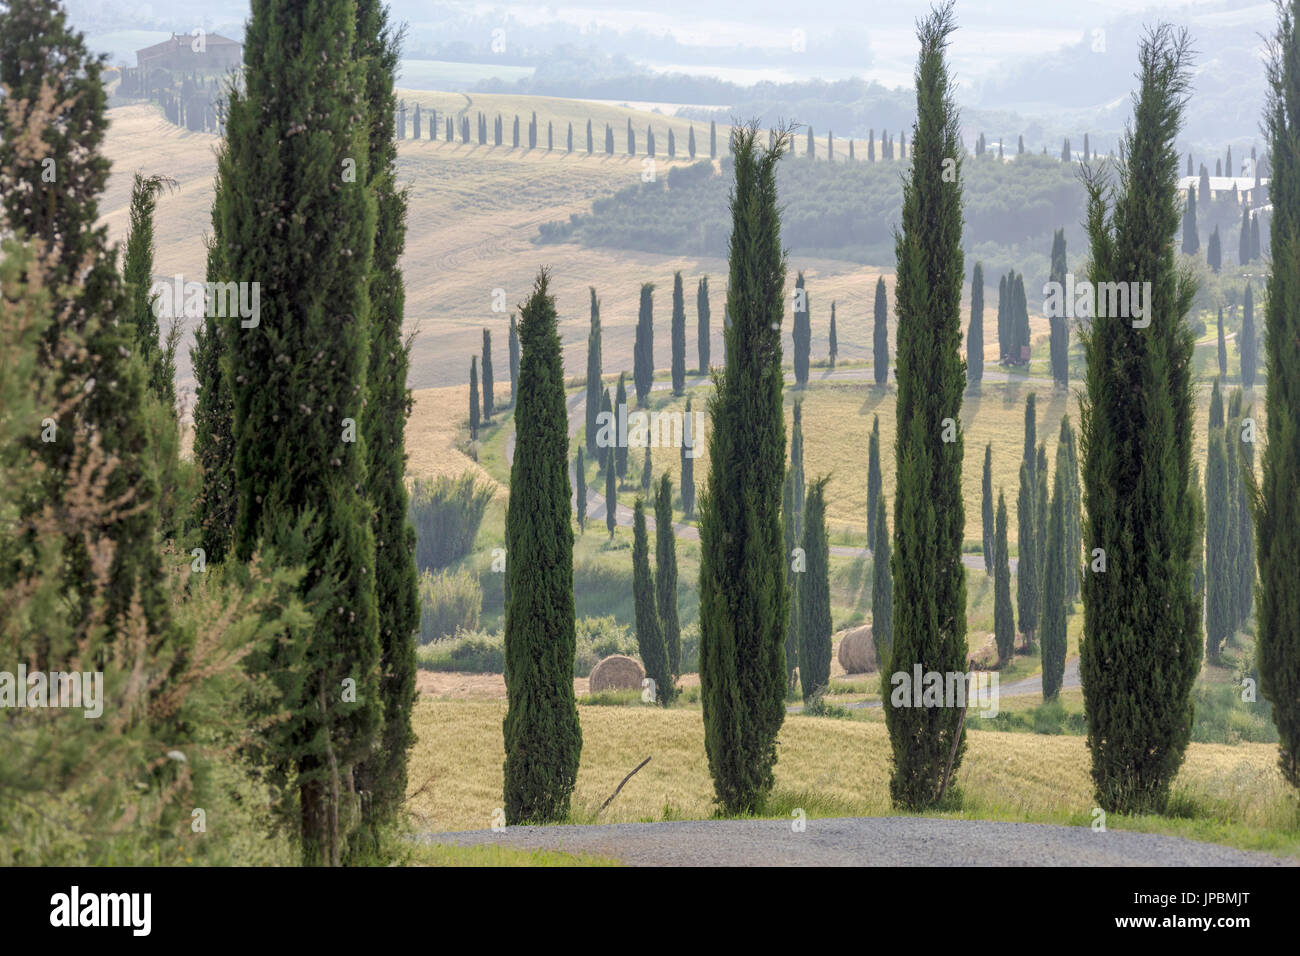 Cypresses  and hay bales in the green gentle hills of Crete Senesi (Senese Clays) province of Siena Tuscany Italy Europe Stock Photo